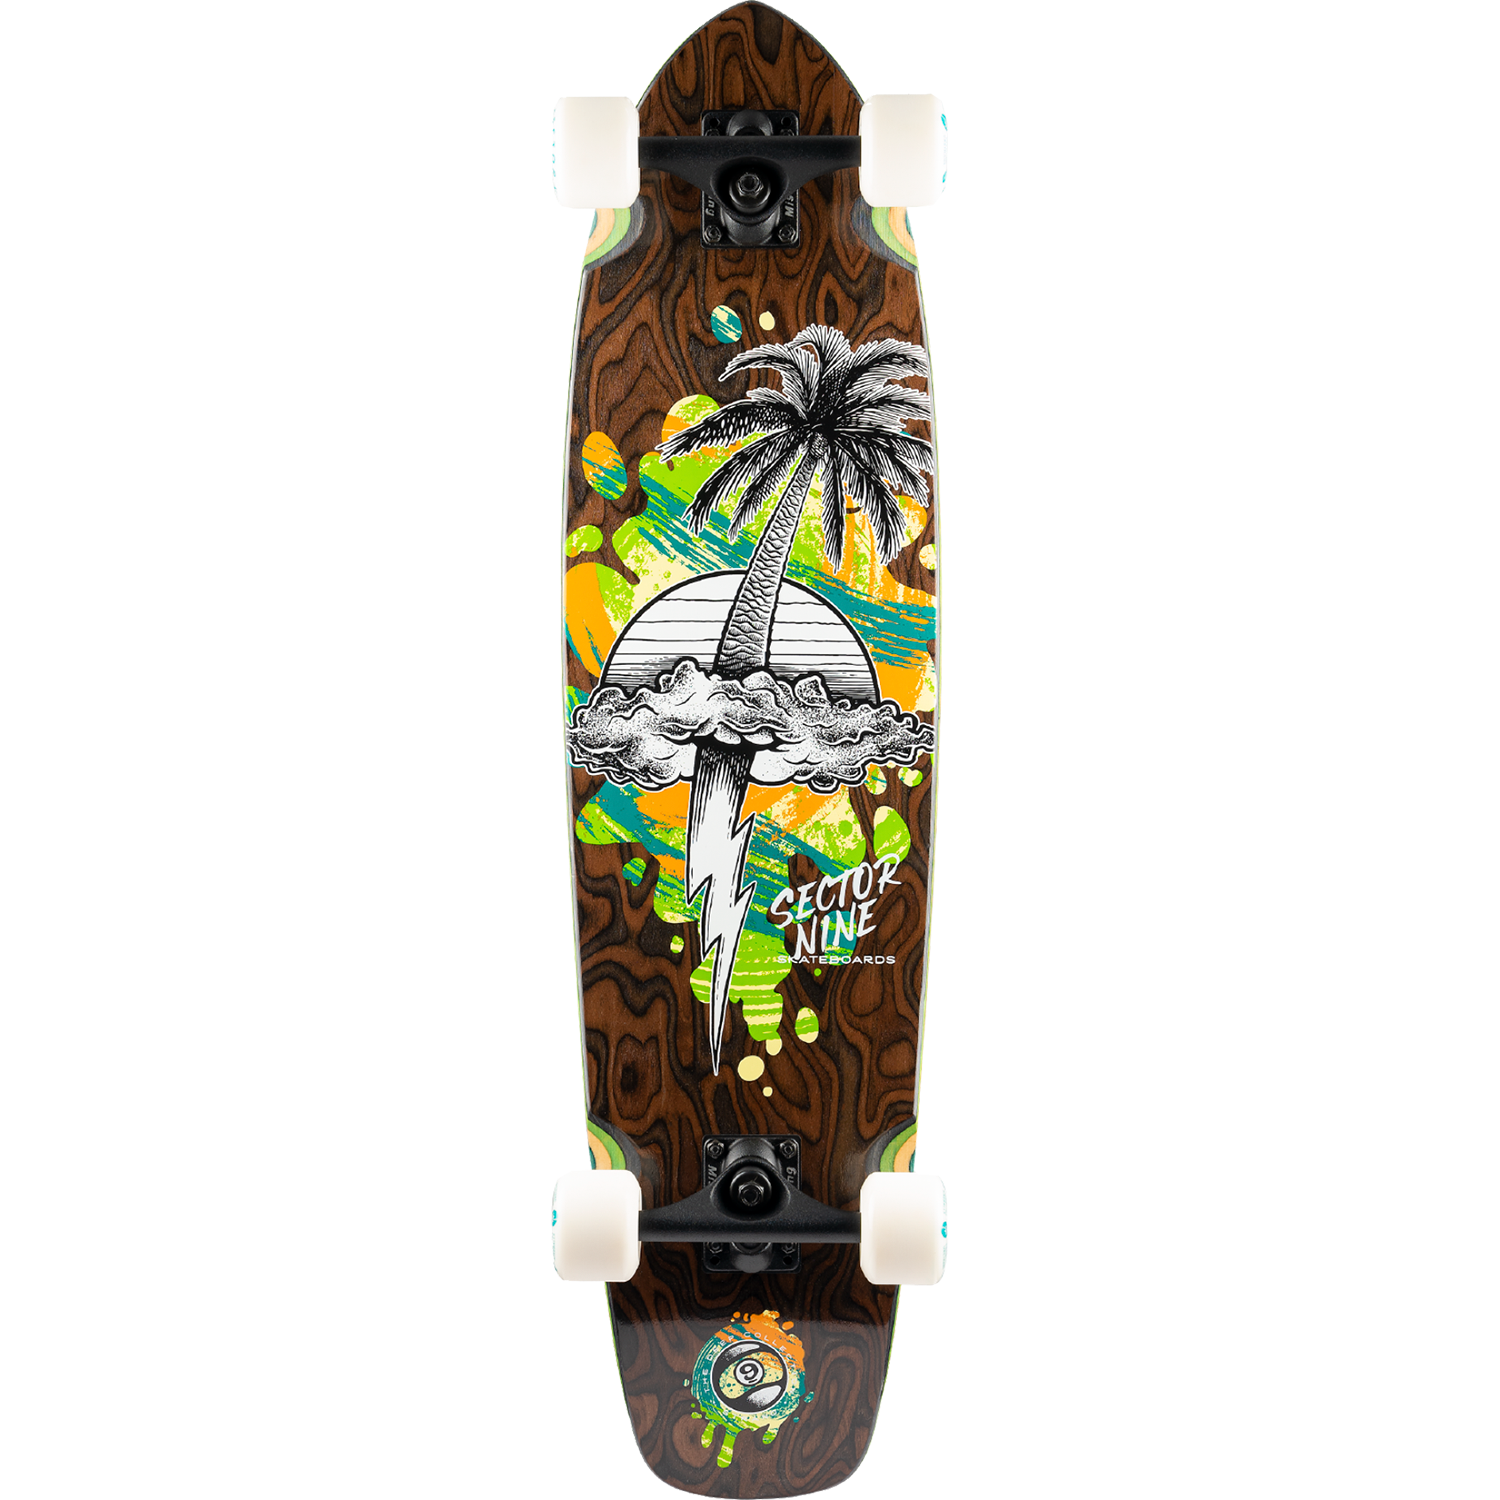 SECTOR 9 // STRAND SQUALL COMPLETE-8.7x20.5